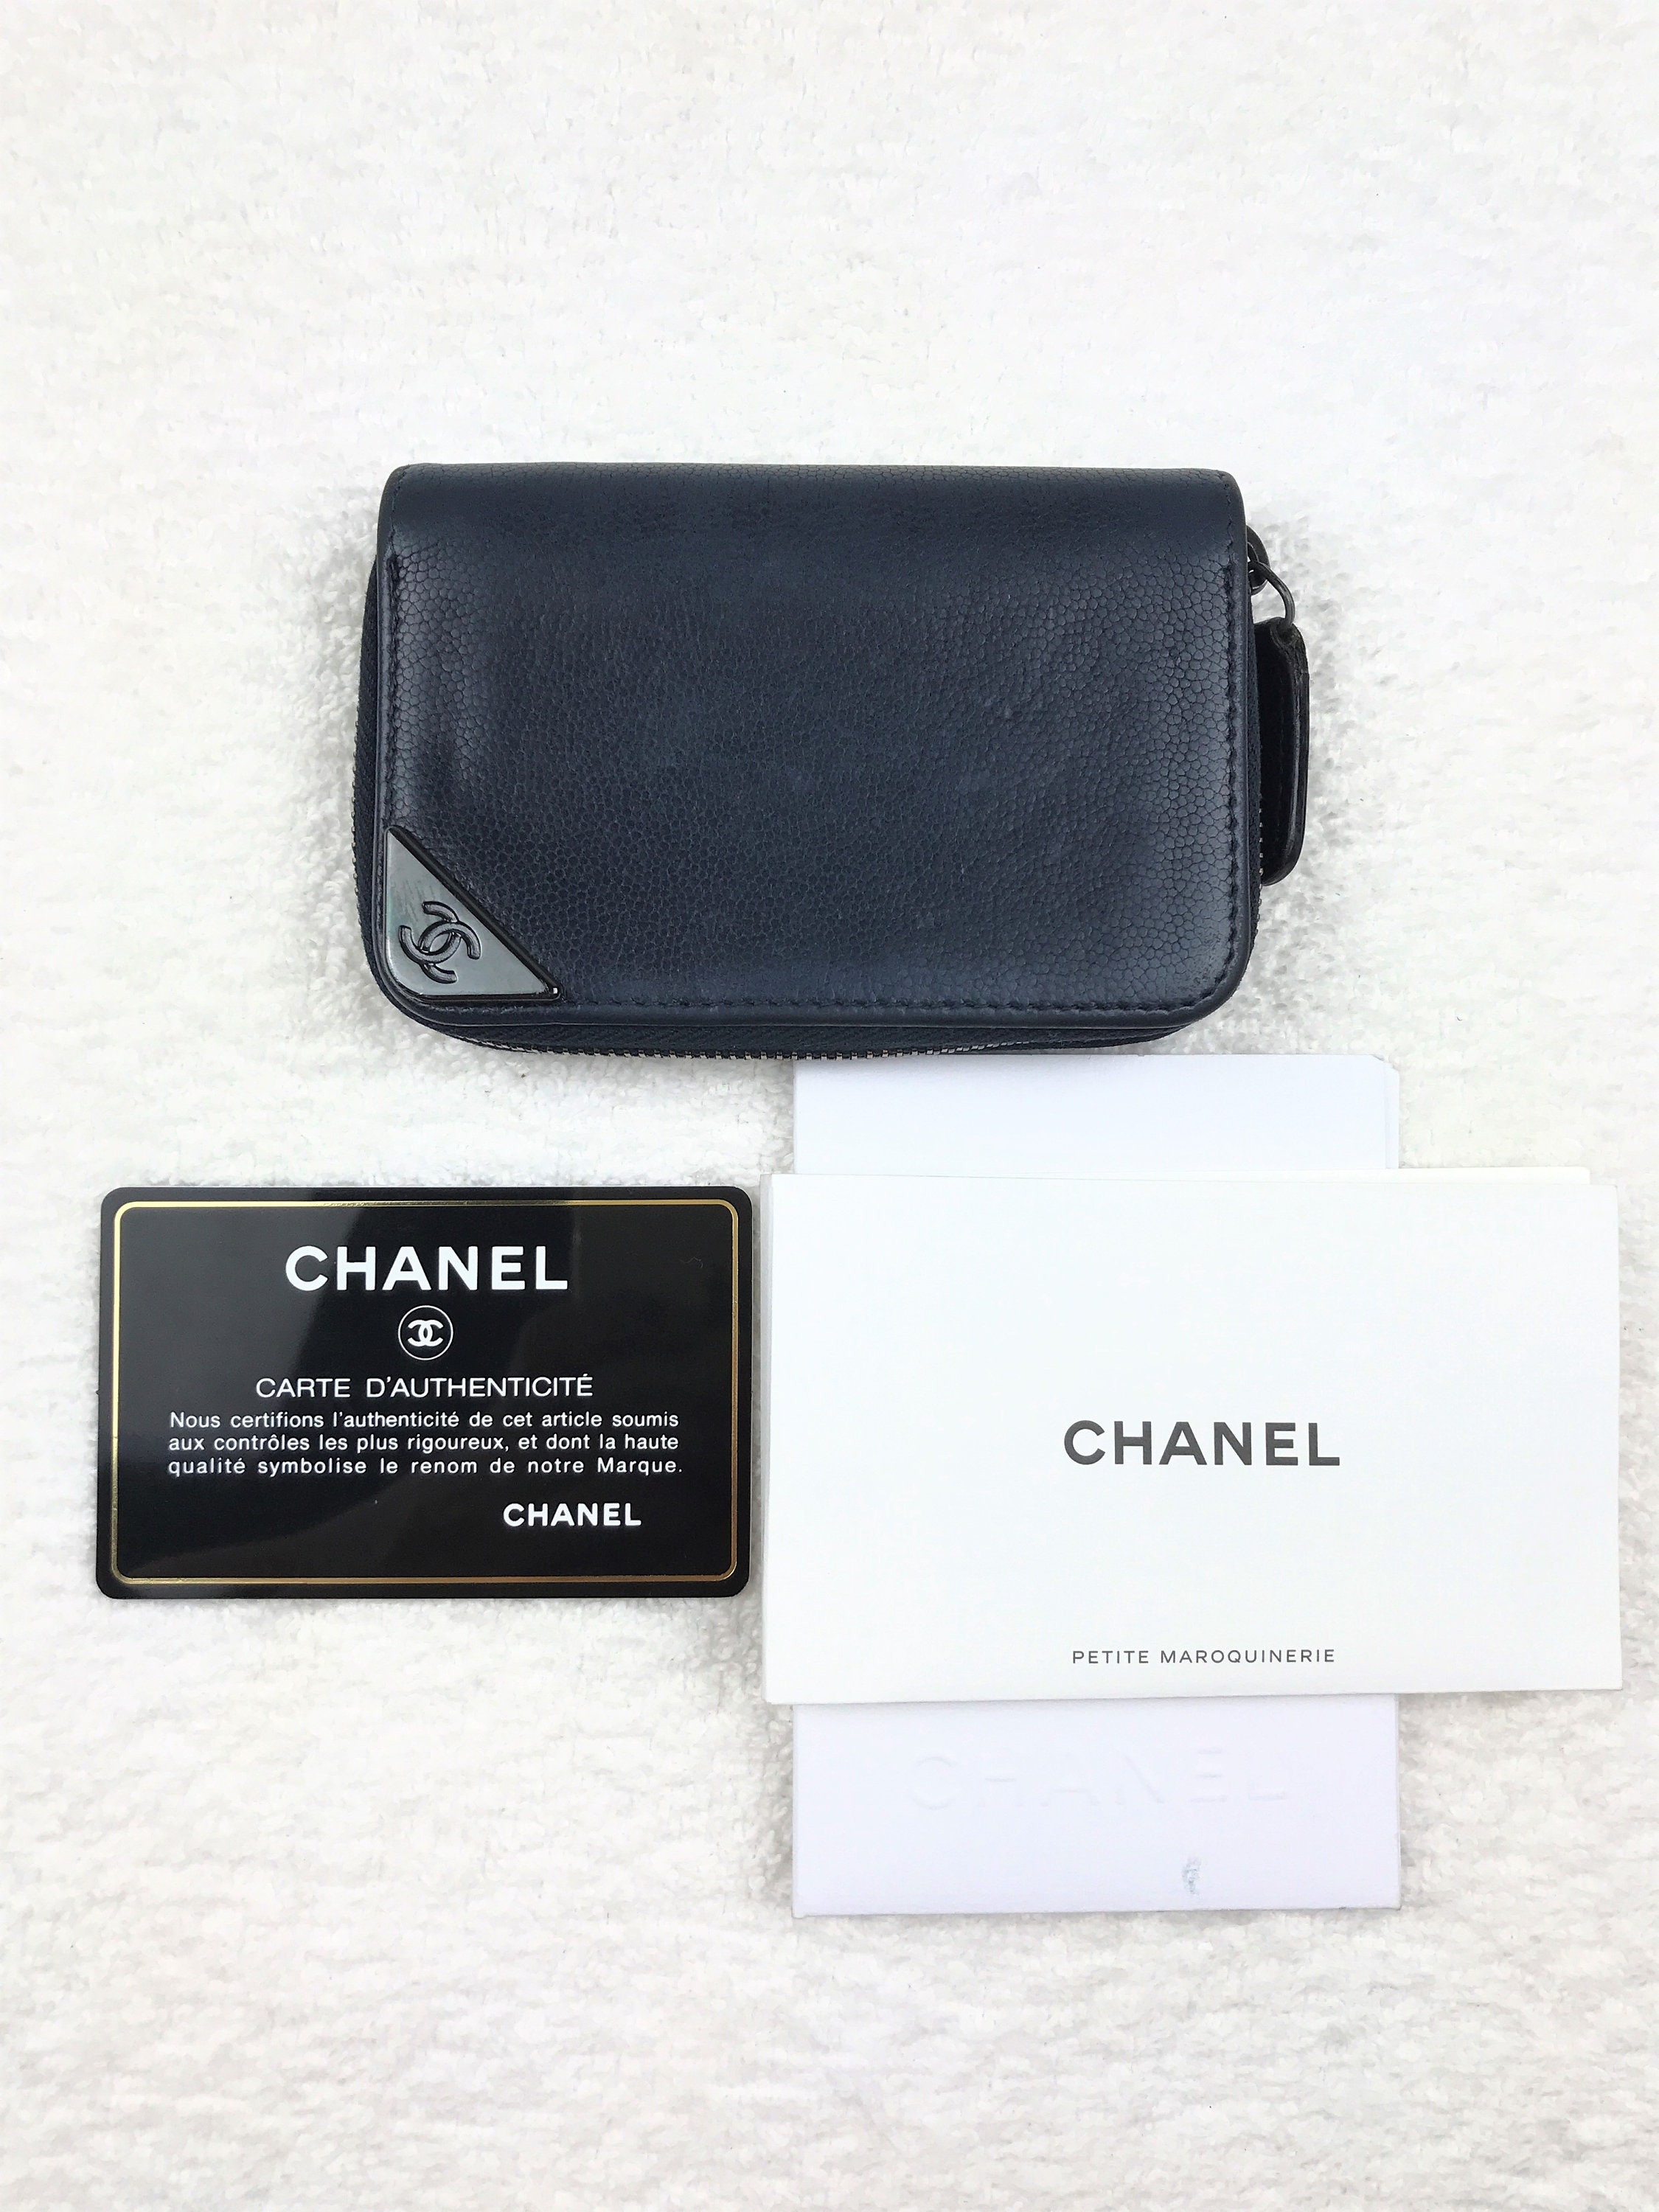 CHANEL WOC + BASE SHAPER // CHECK THE DIFFERENCE 